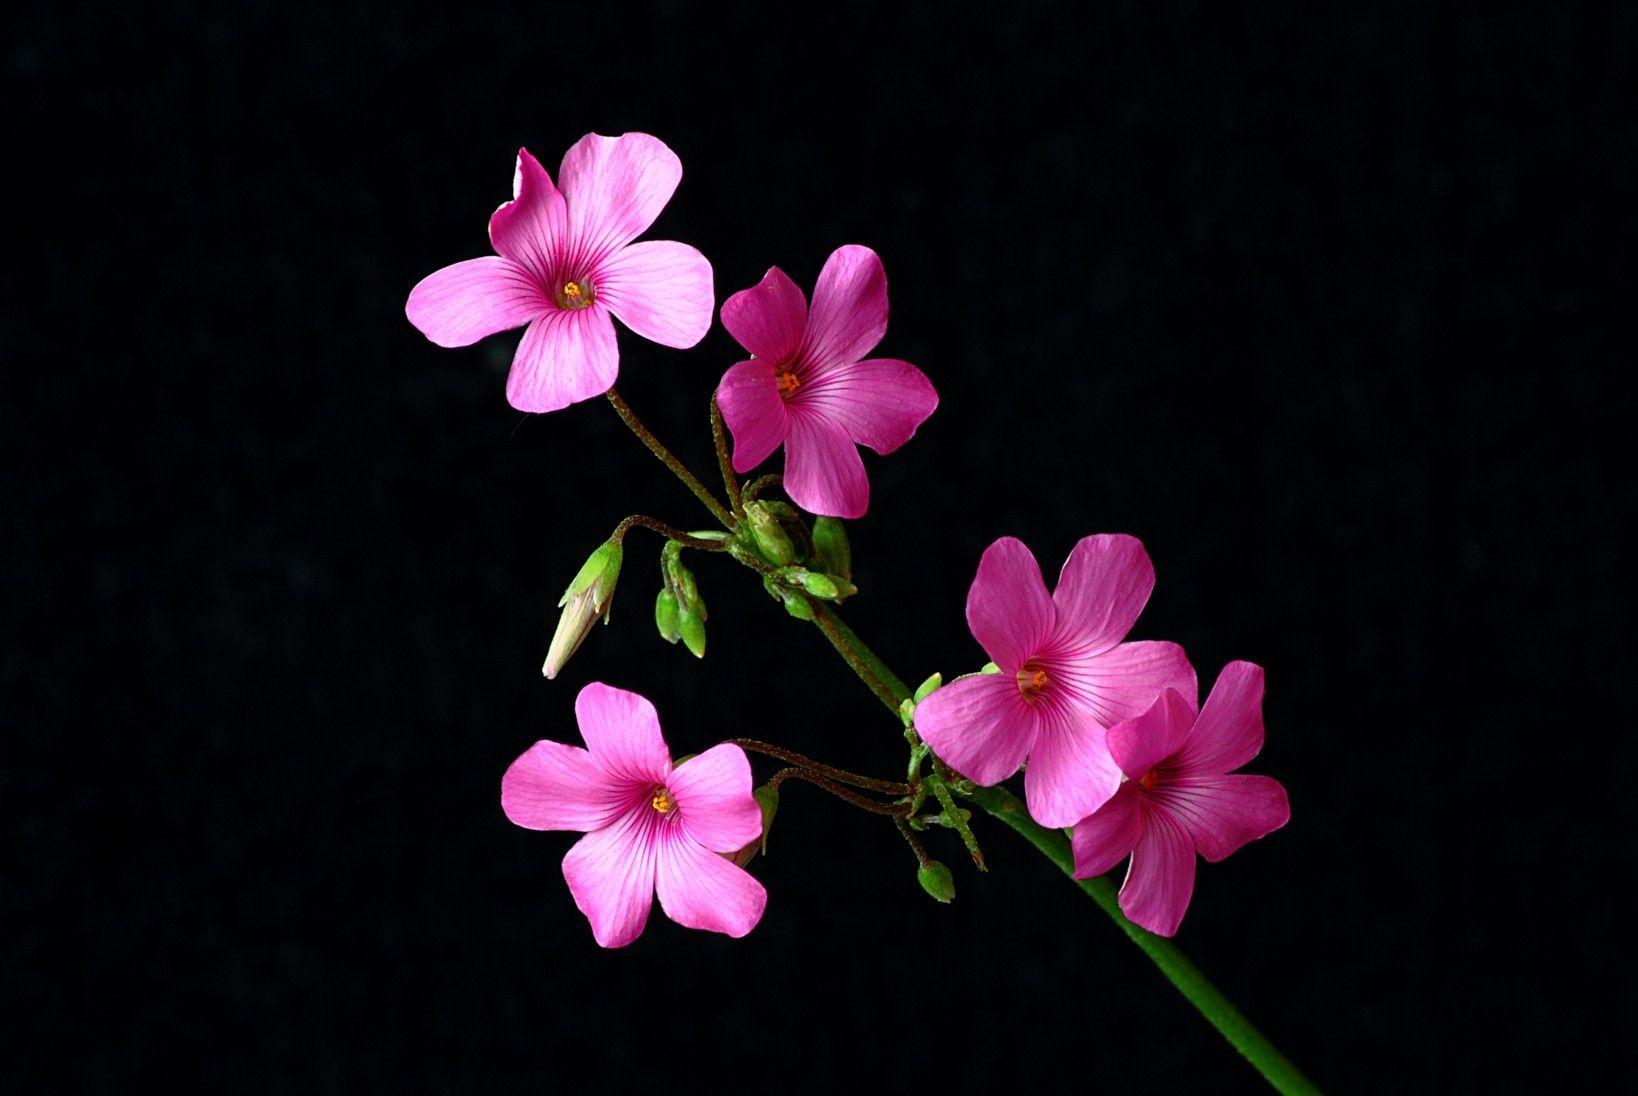 Flowers: Nature Flowers Black Pink Flower HD Full Image for HD 16:9